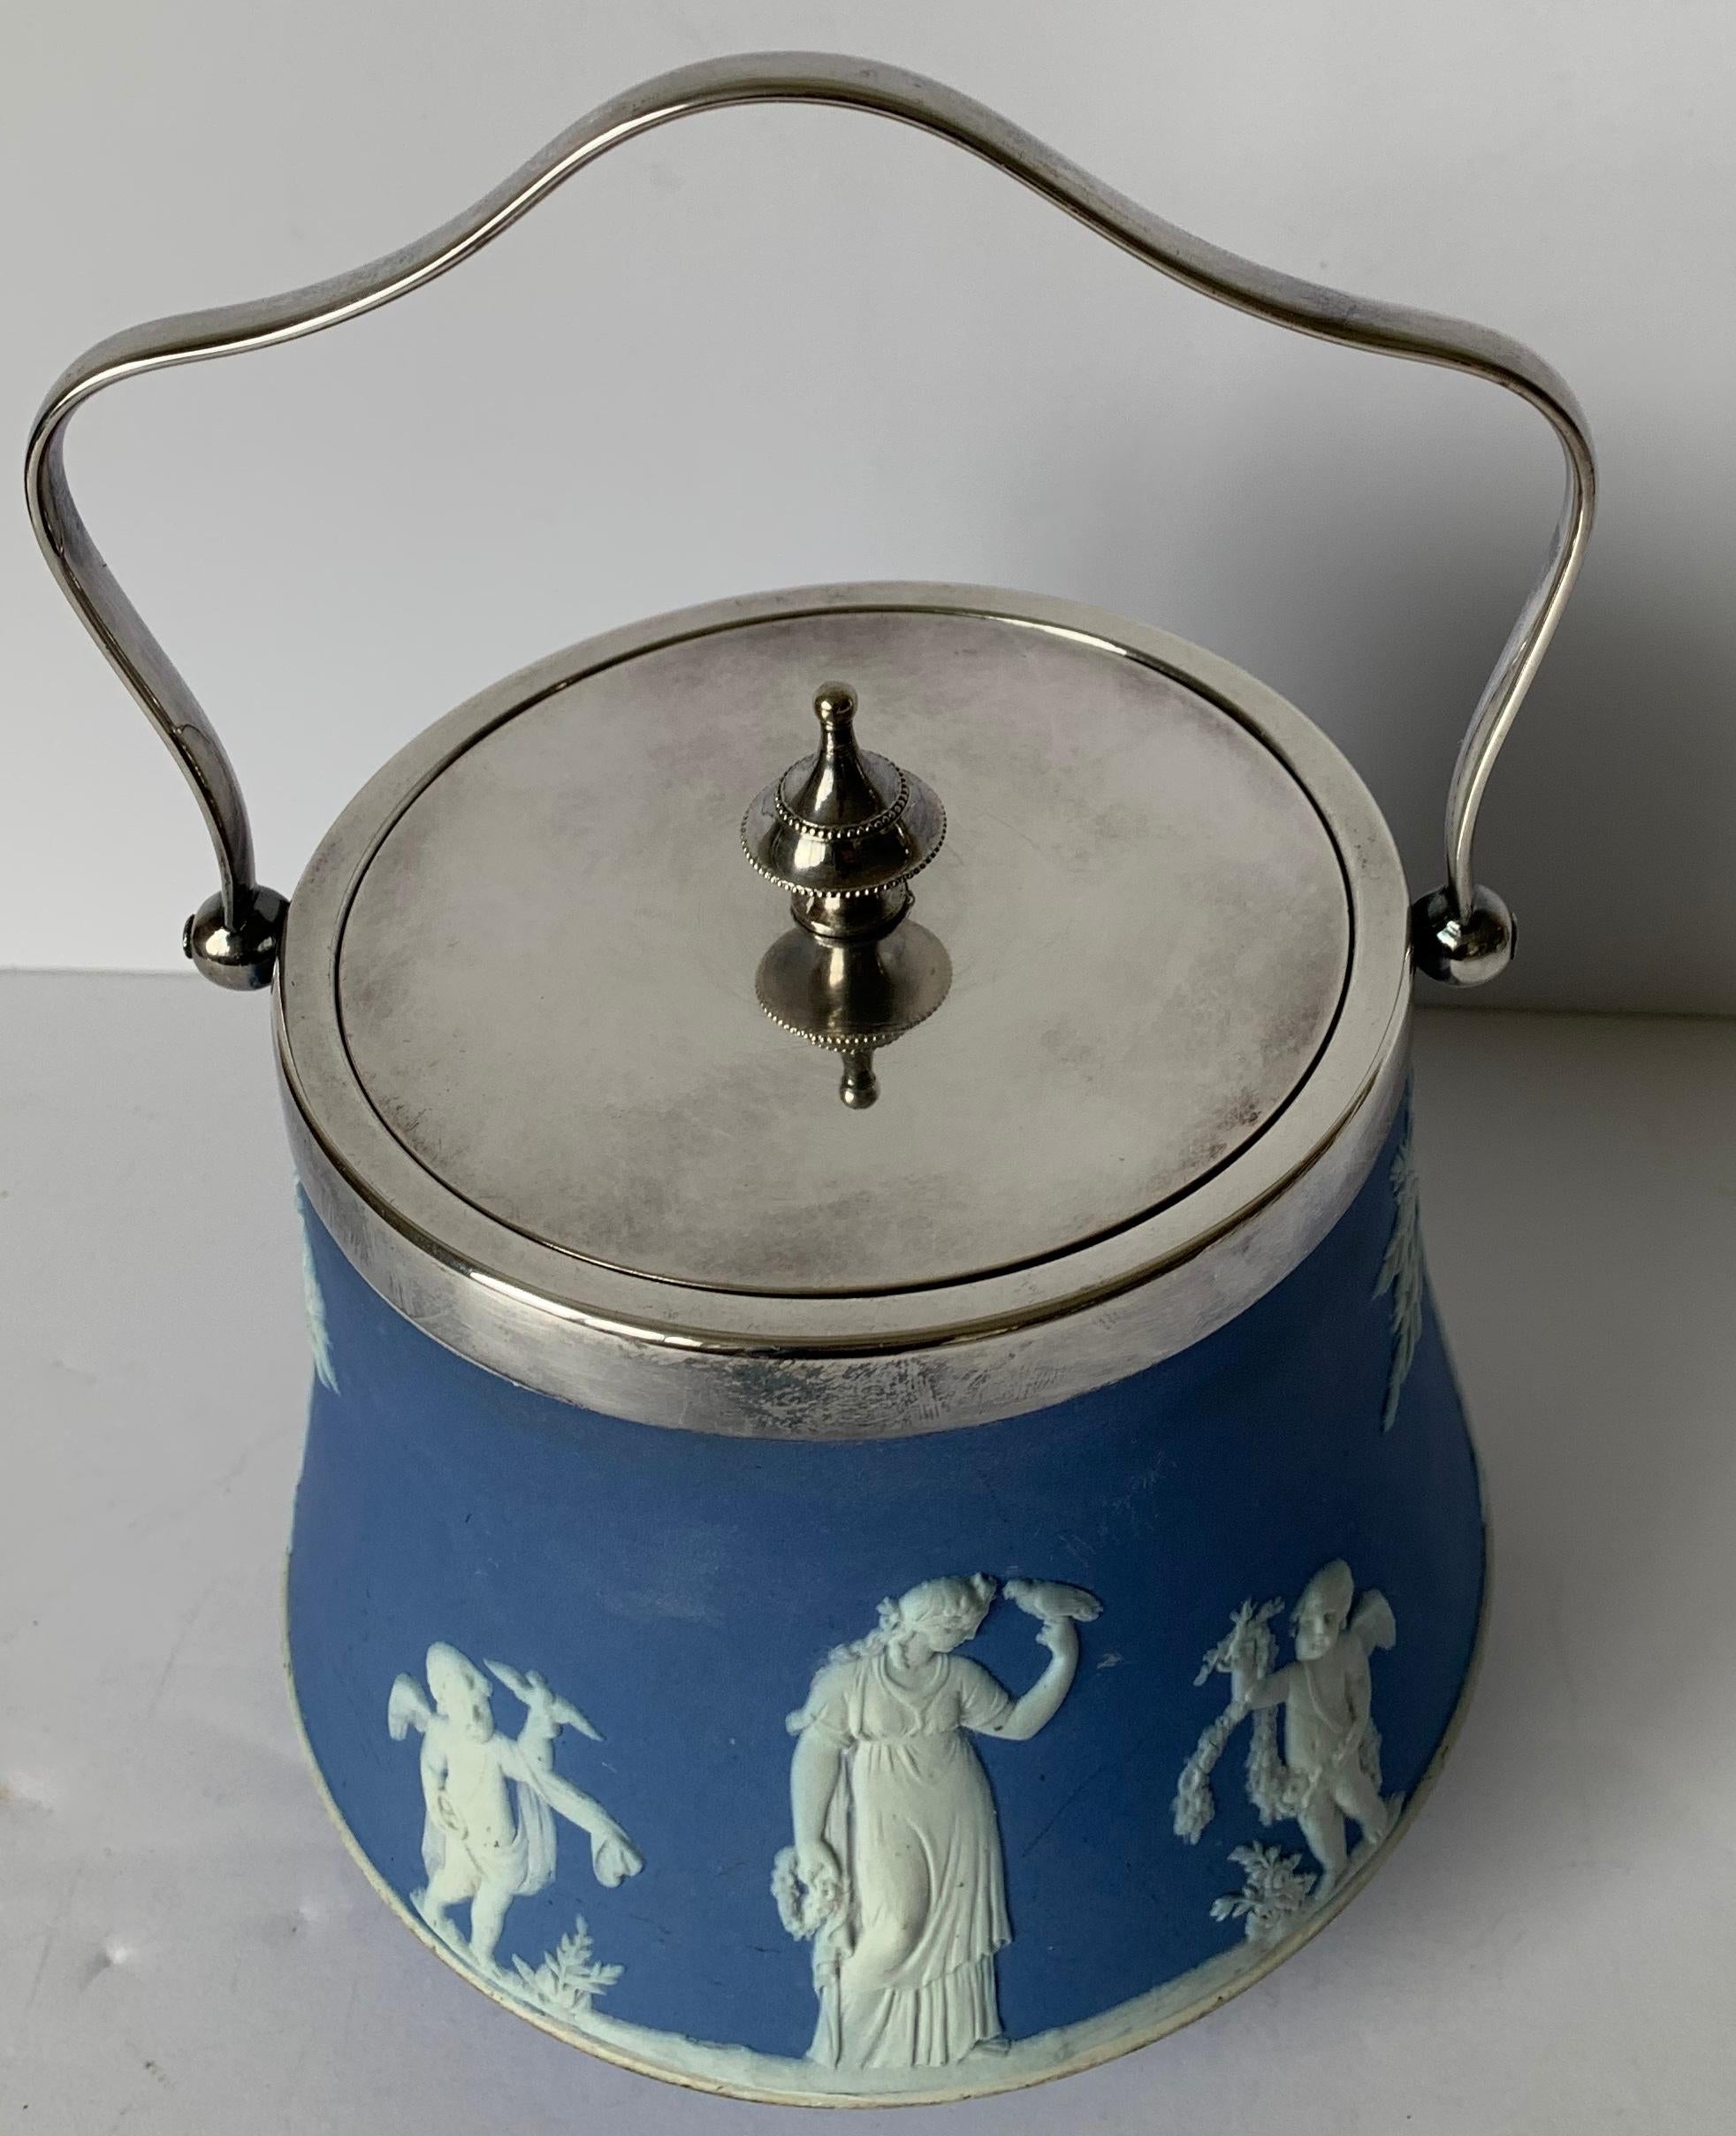 Wedgwood light blue bell shaped jasperware biscuit barrel overall neoclassical motif with a silver plated lid and handle. Stamped Wedgwood on the underside and lid is marked.